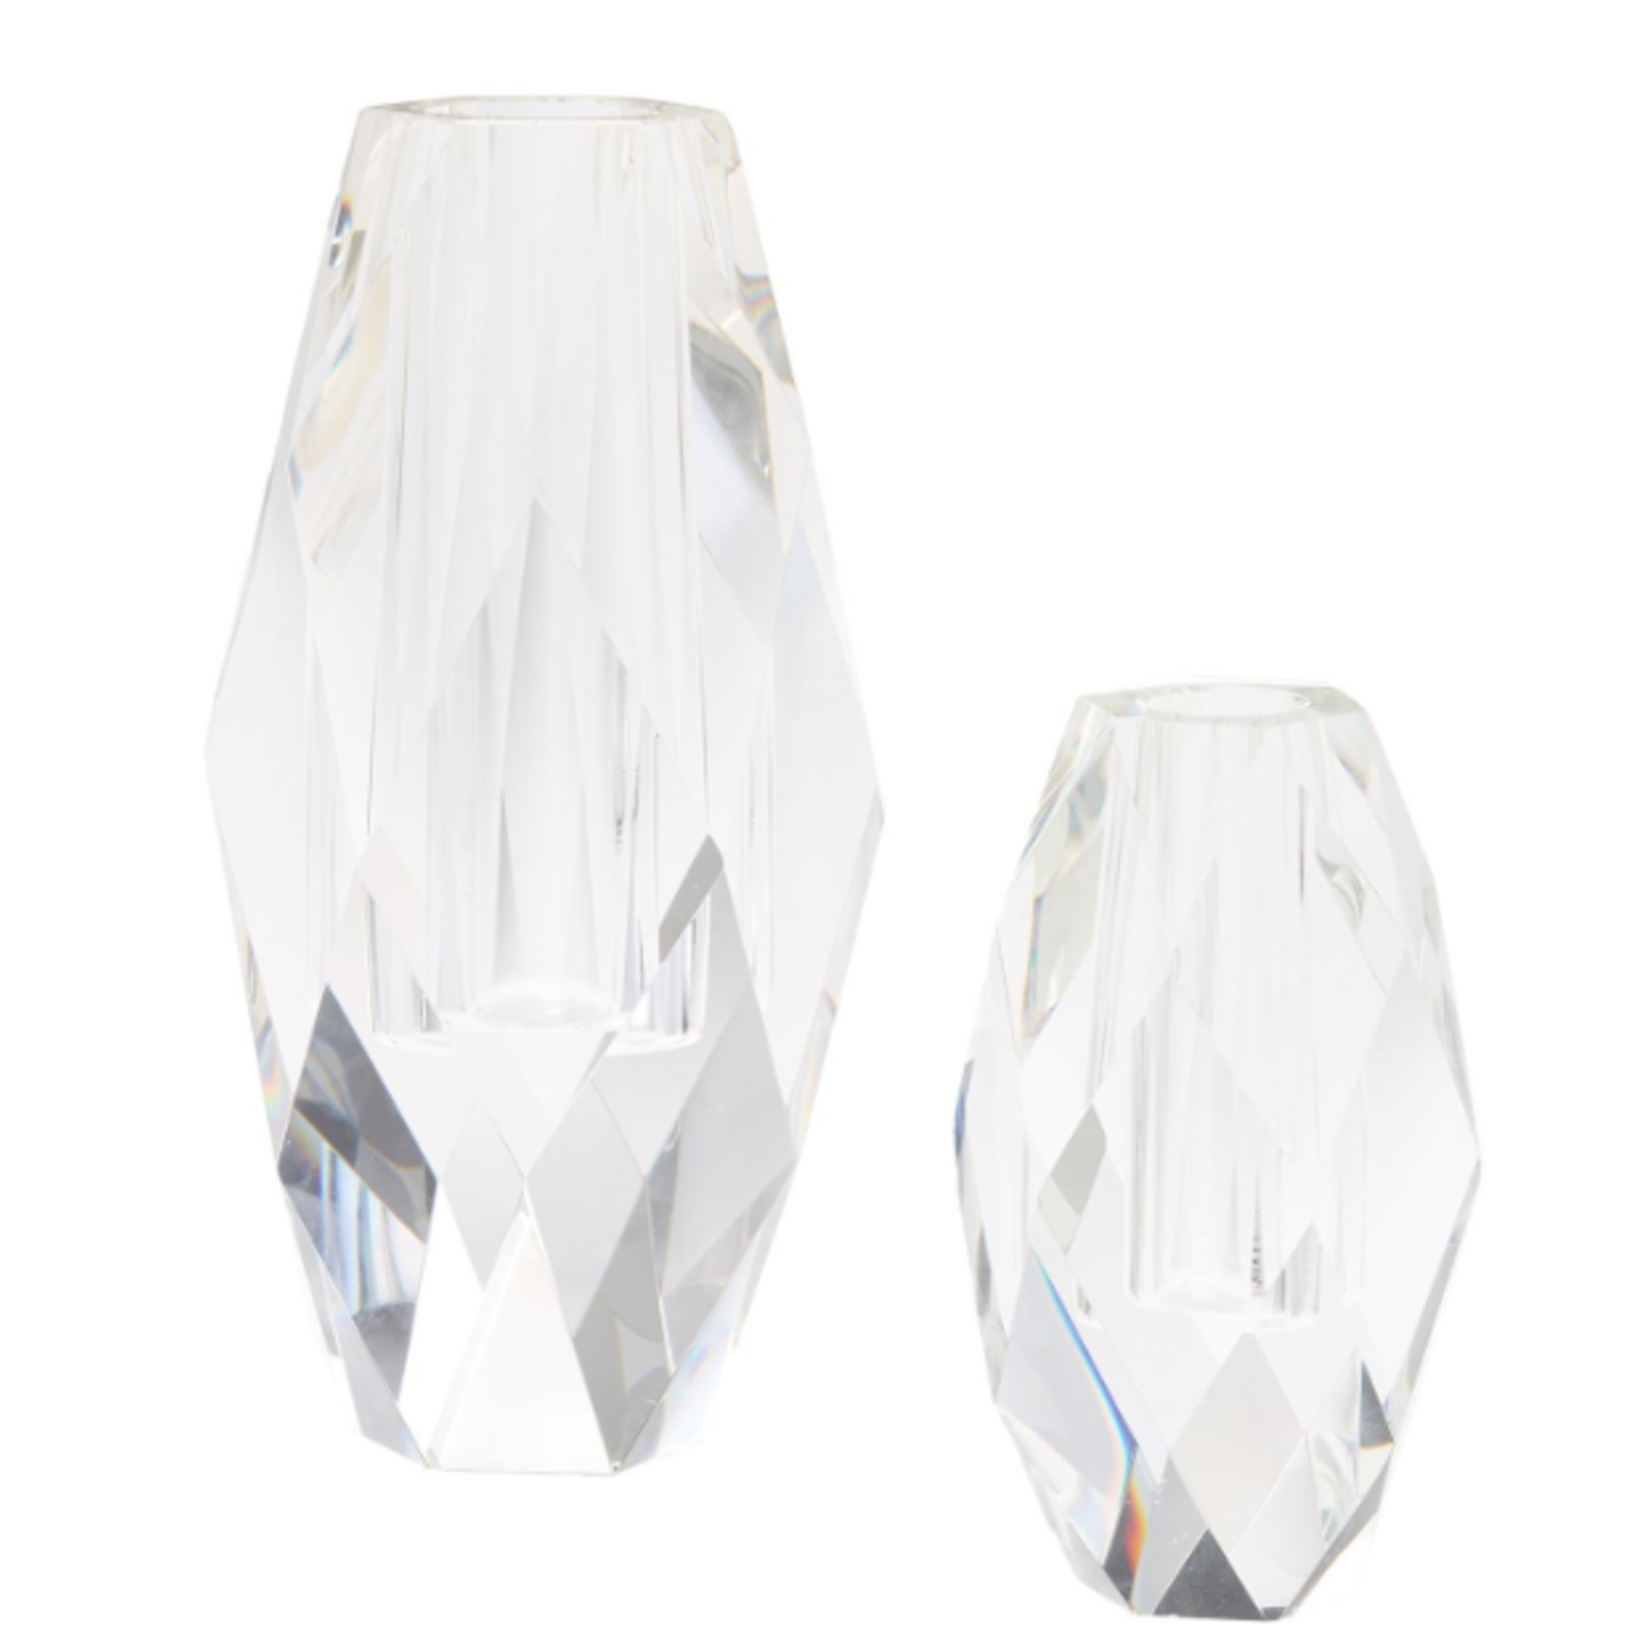 Two's Company Faceted Crystal Vase - S/2